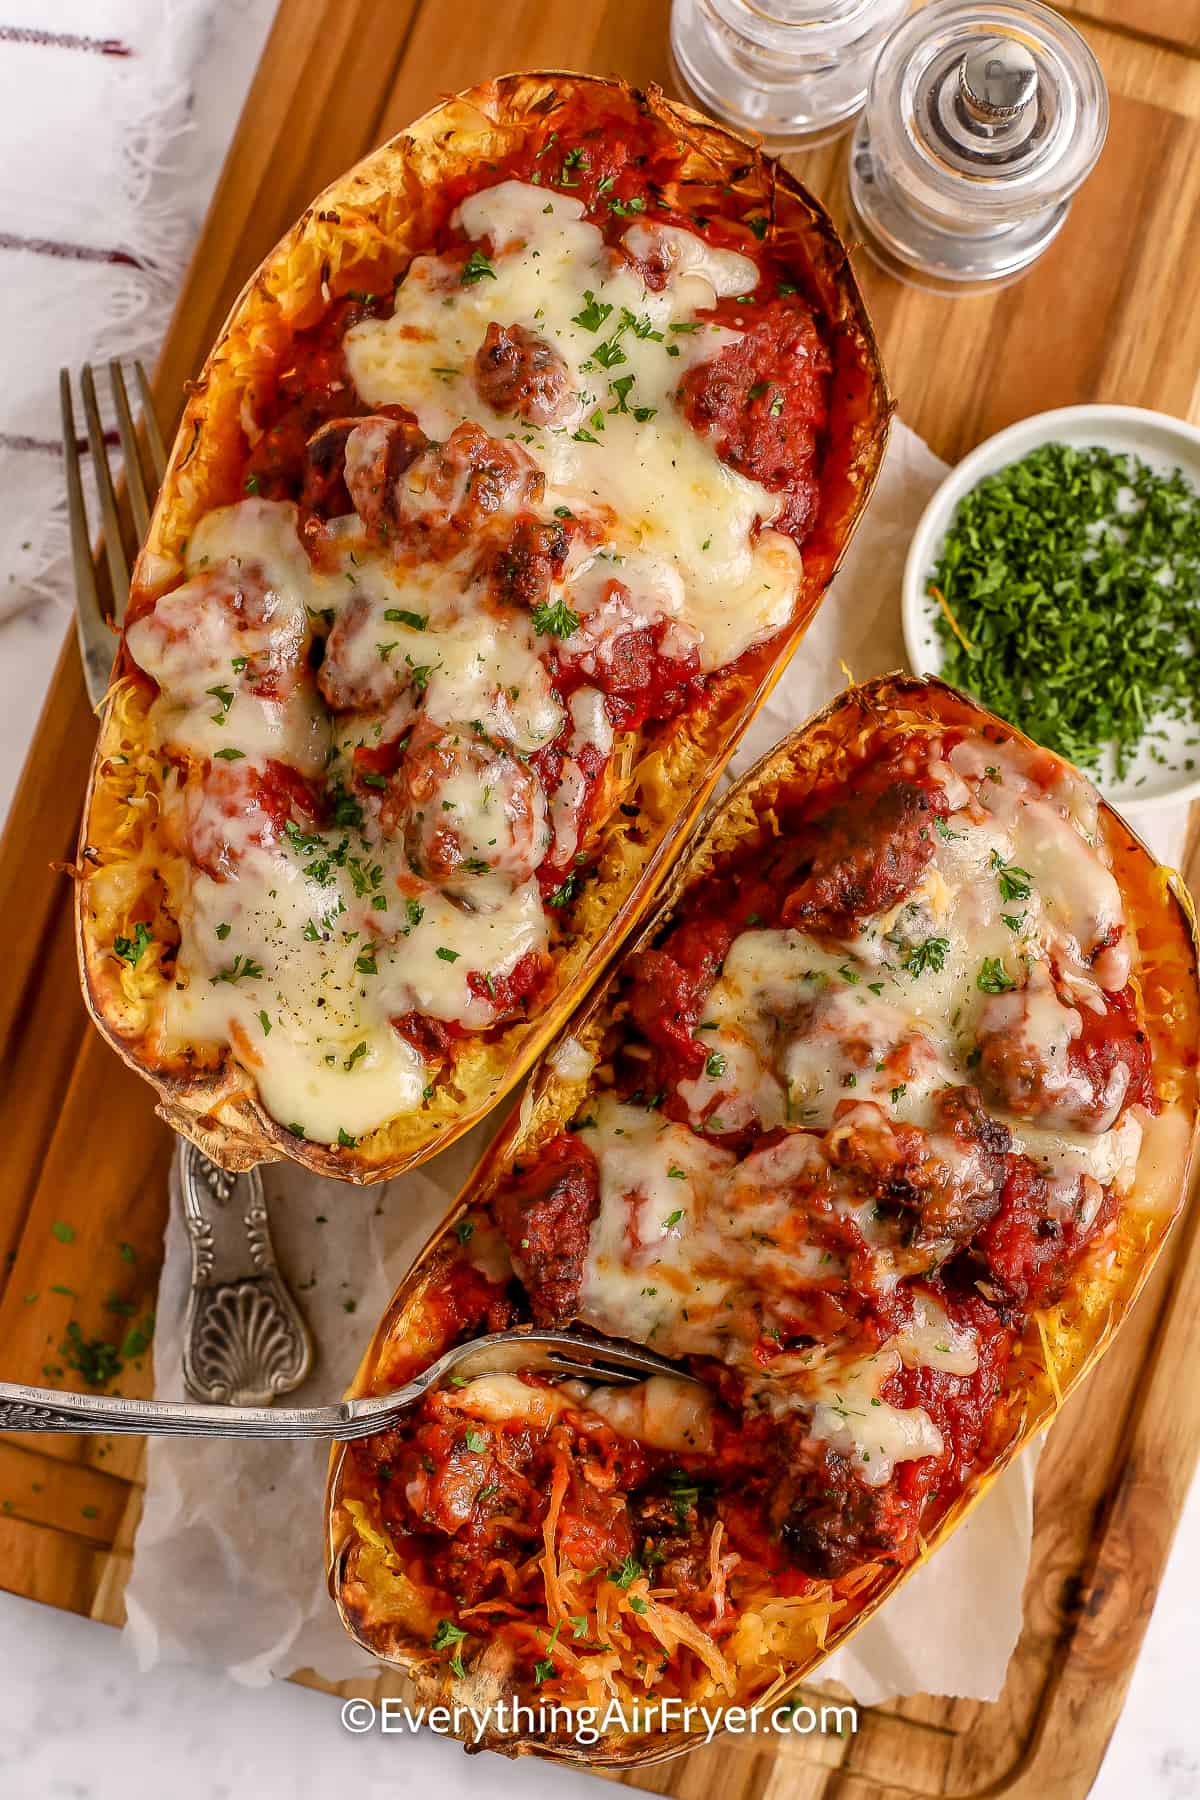 Two Air Fryer Stuffed Spaghetti Squash halves being served